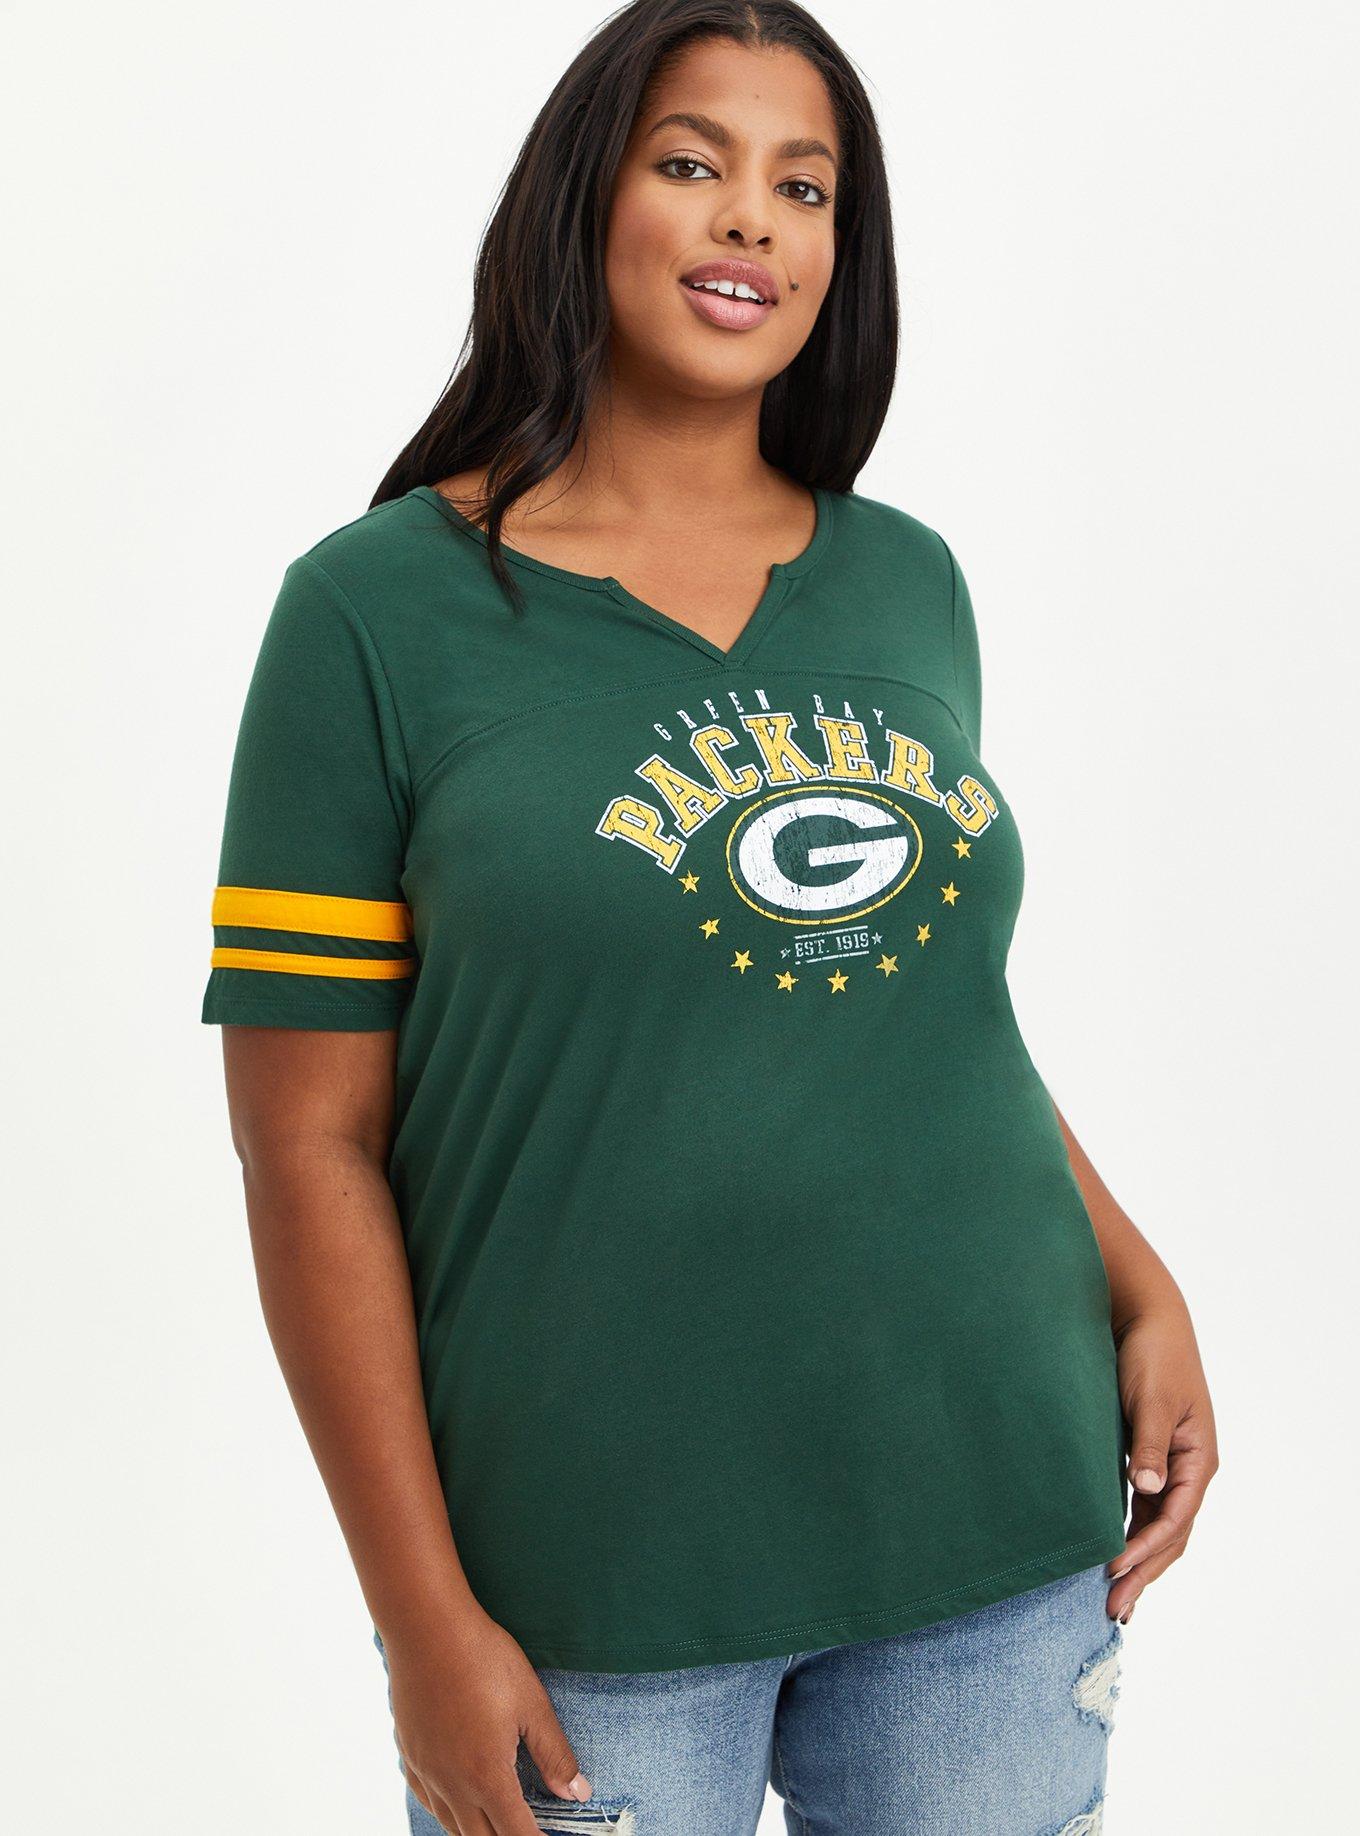 Plus Size - Classic Fit Football Tee - Green Bay Packers Green